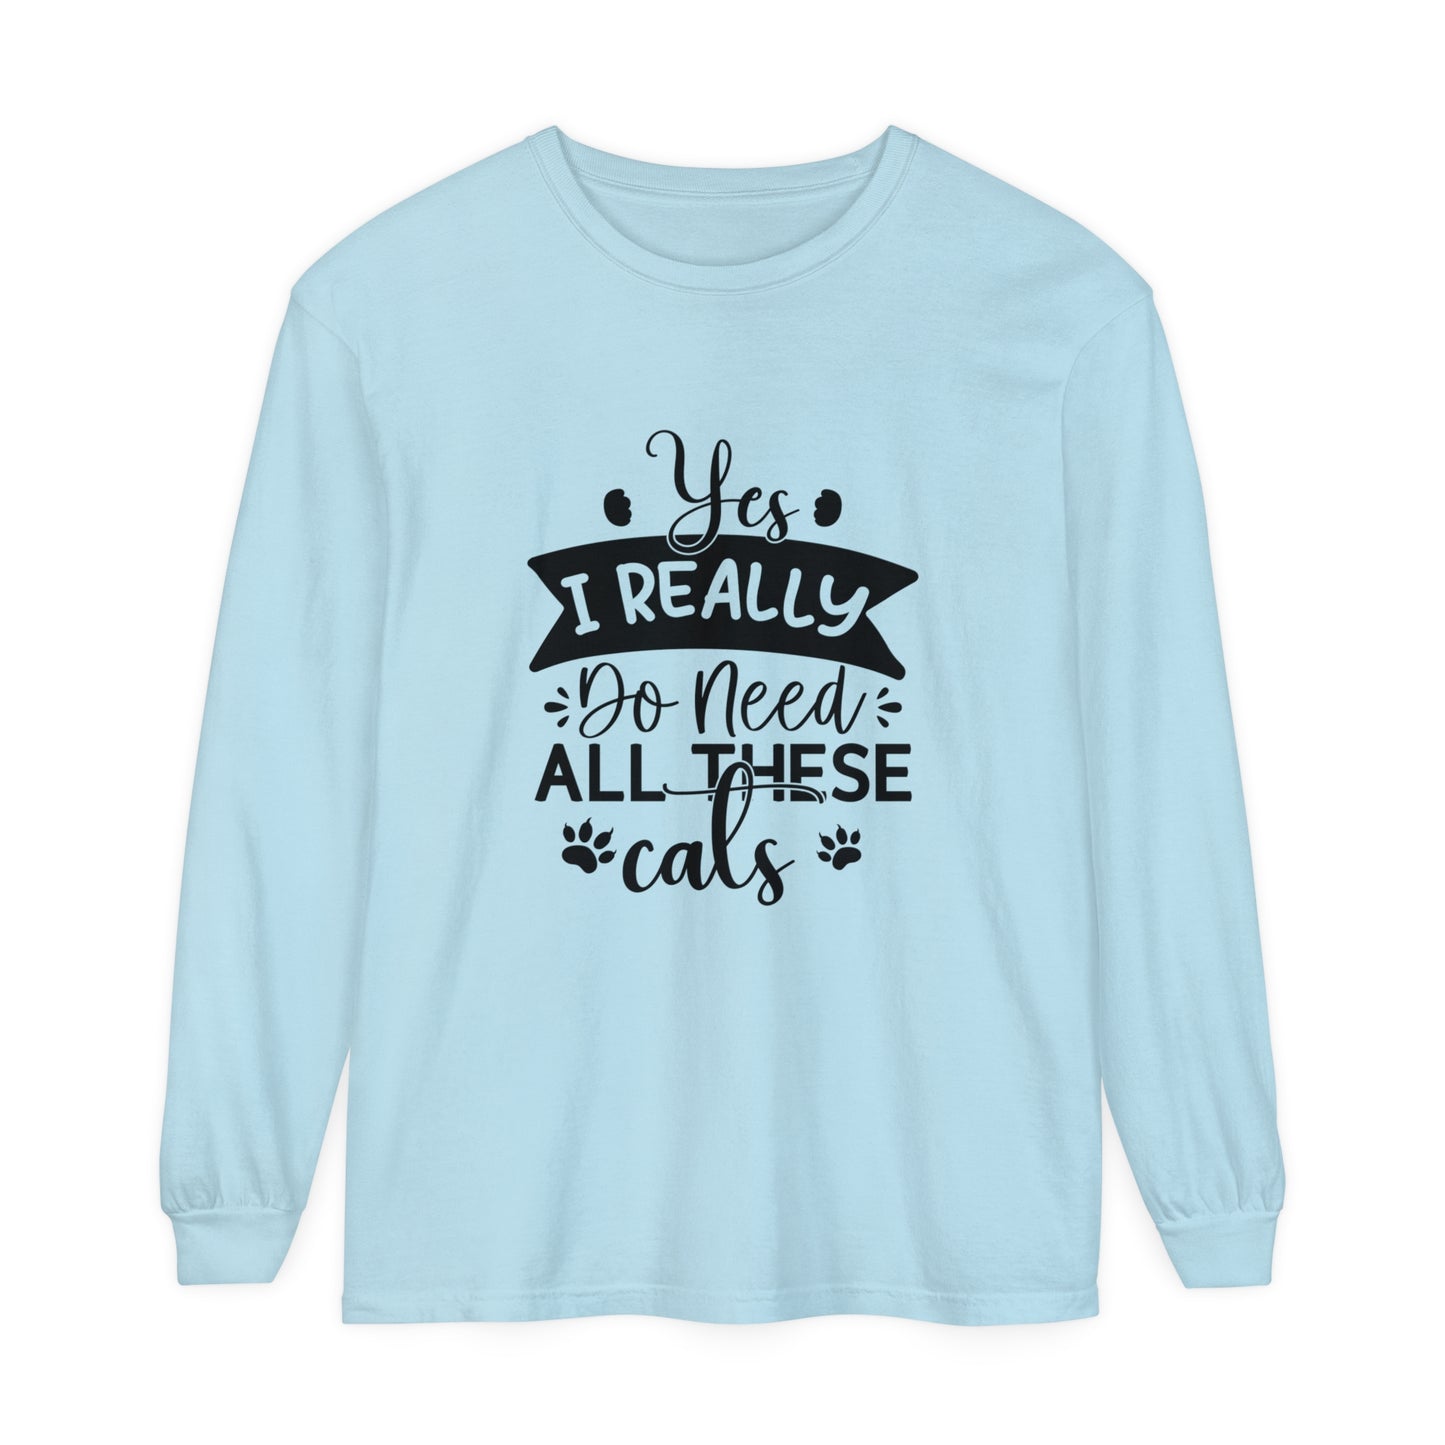 Yes I really need all these cats Women's Loose Long Sleeve T-Shirt